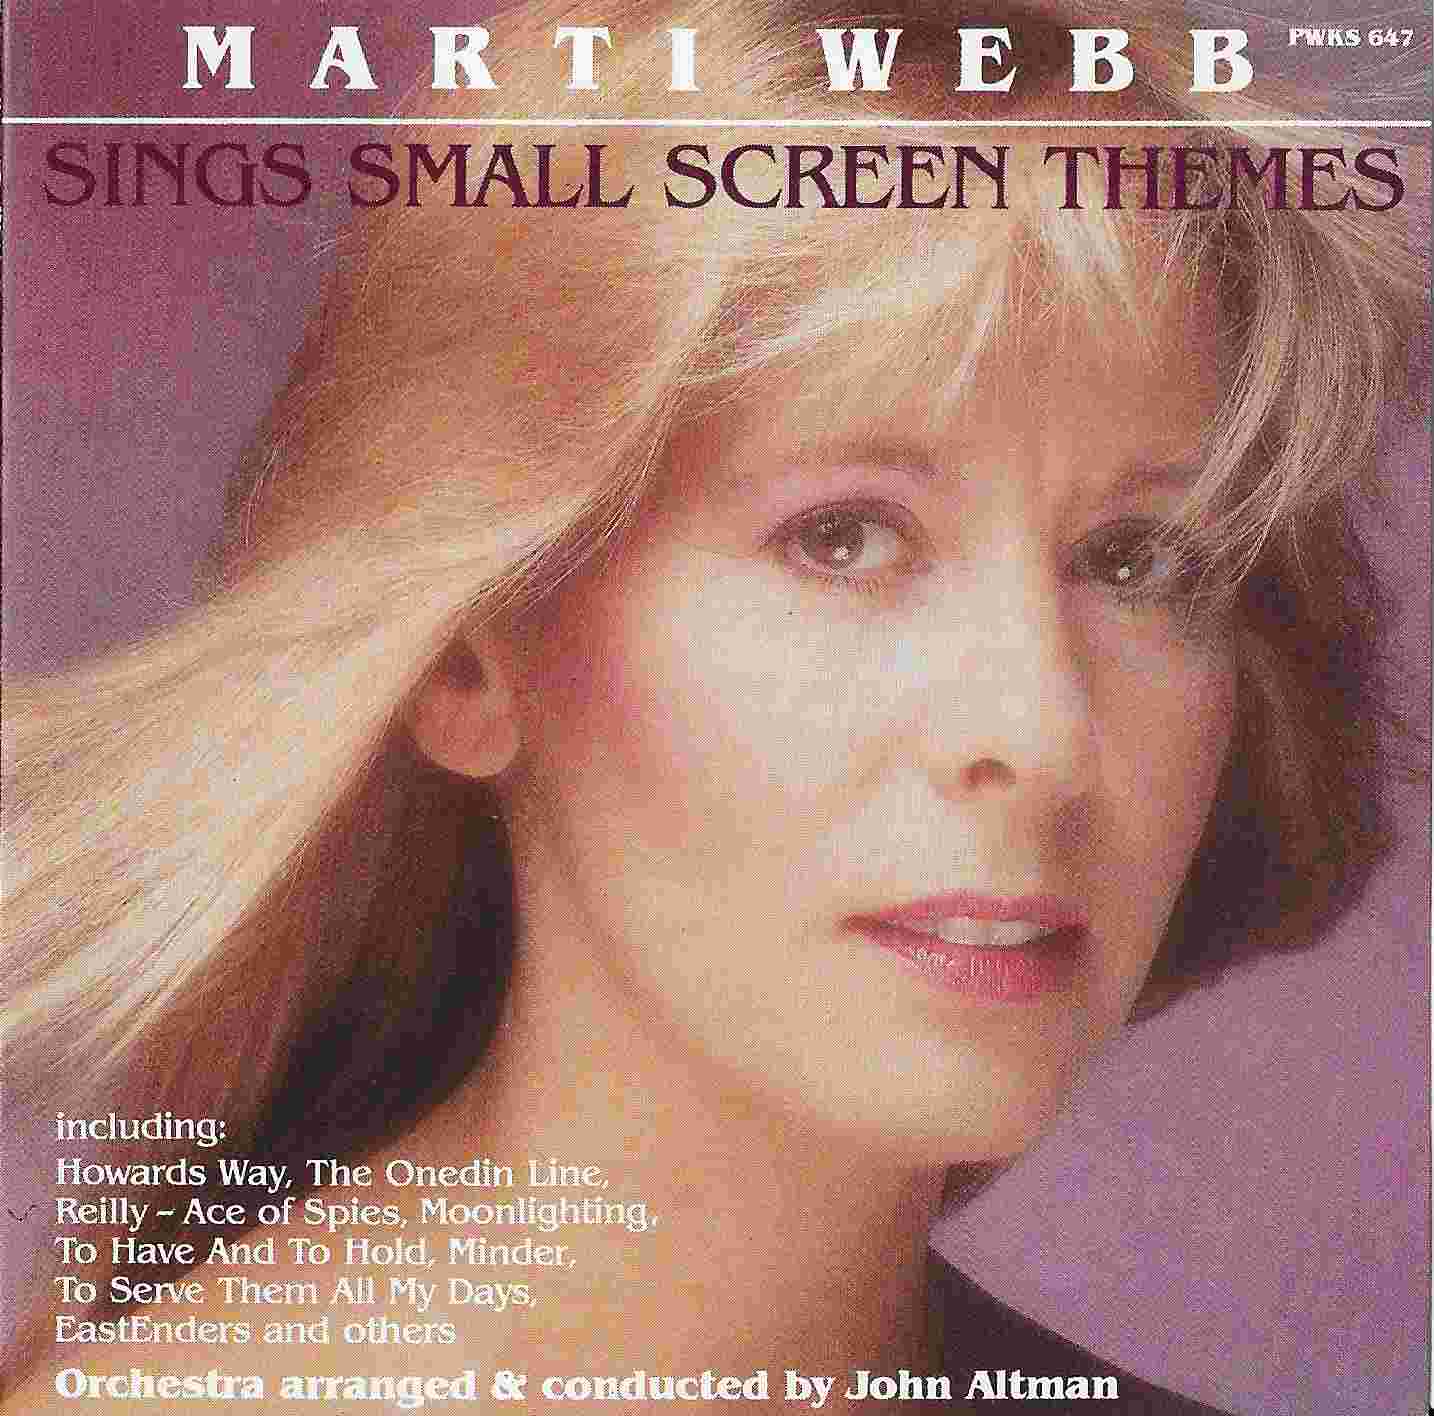 Picture of Always there by artist Marti Webb from the BBC cds - Records and Tapes library